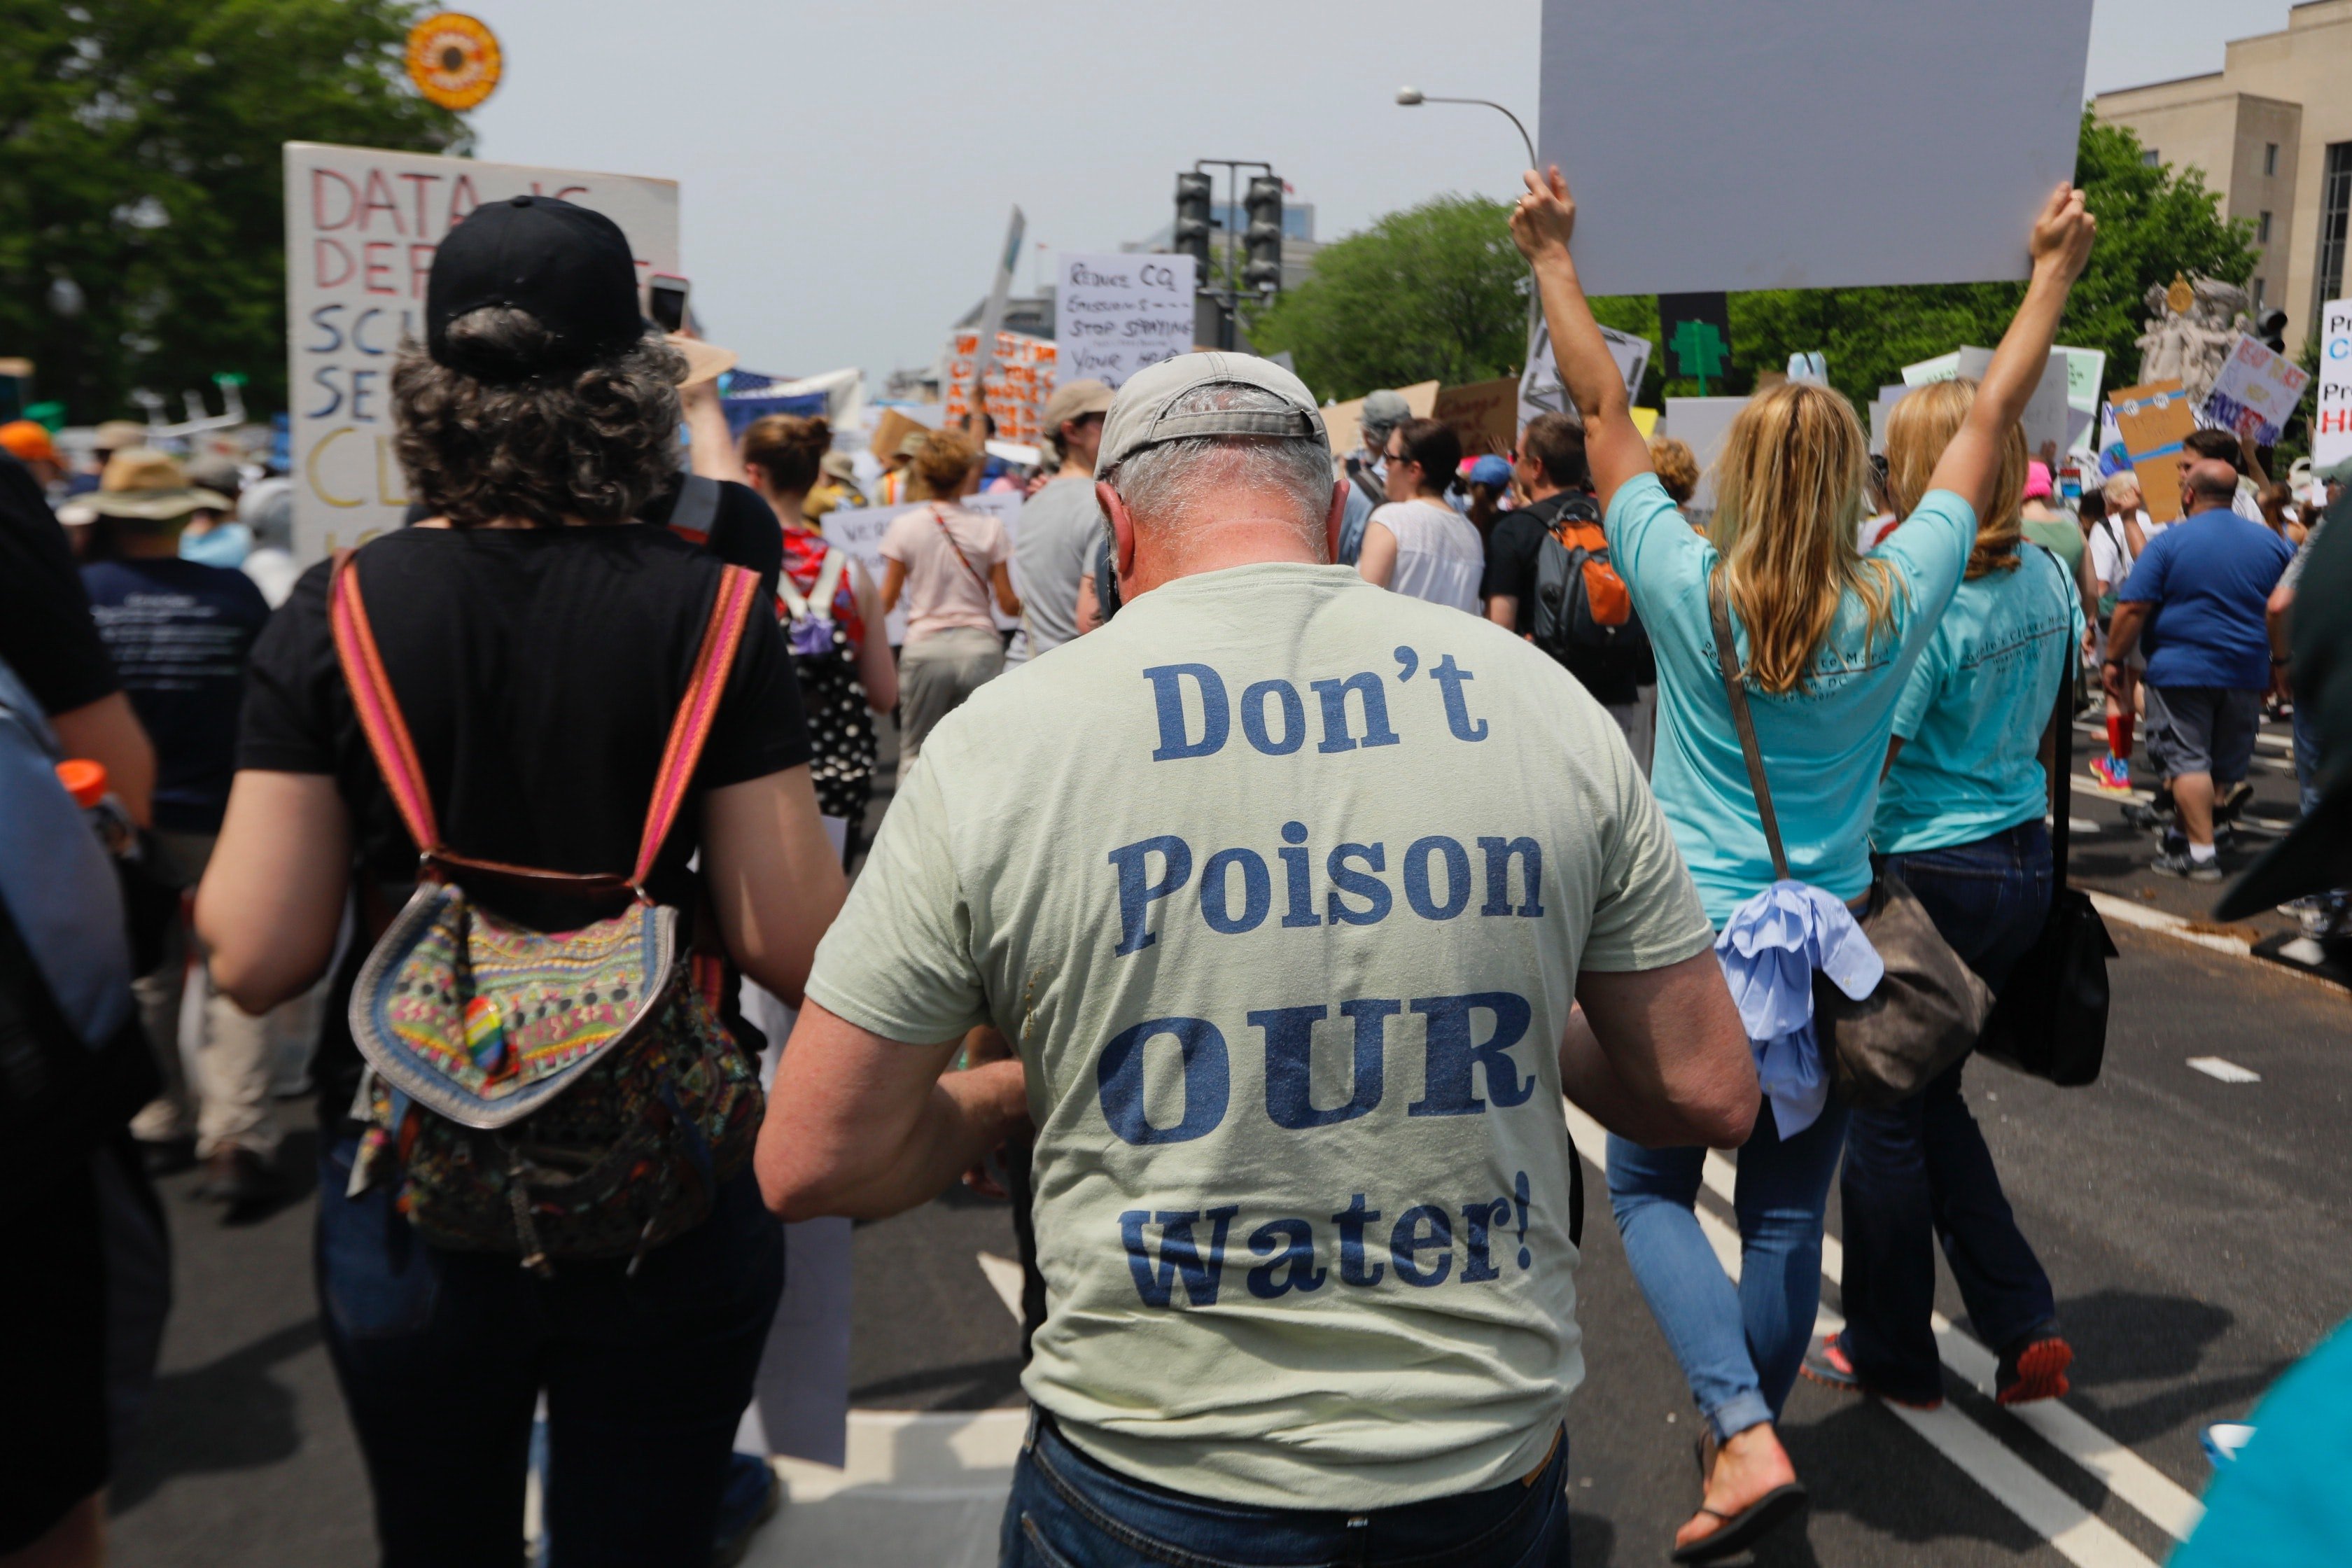 back of a protestor's shirt that says "don't poison our water!"